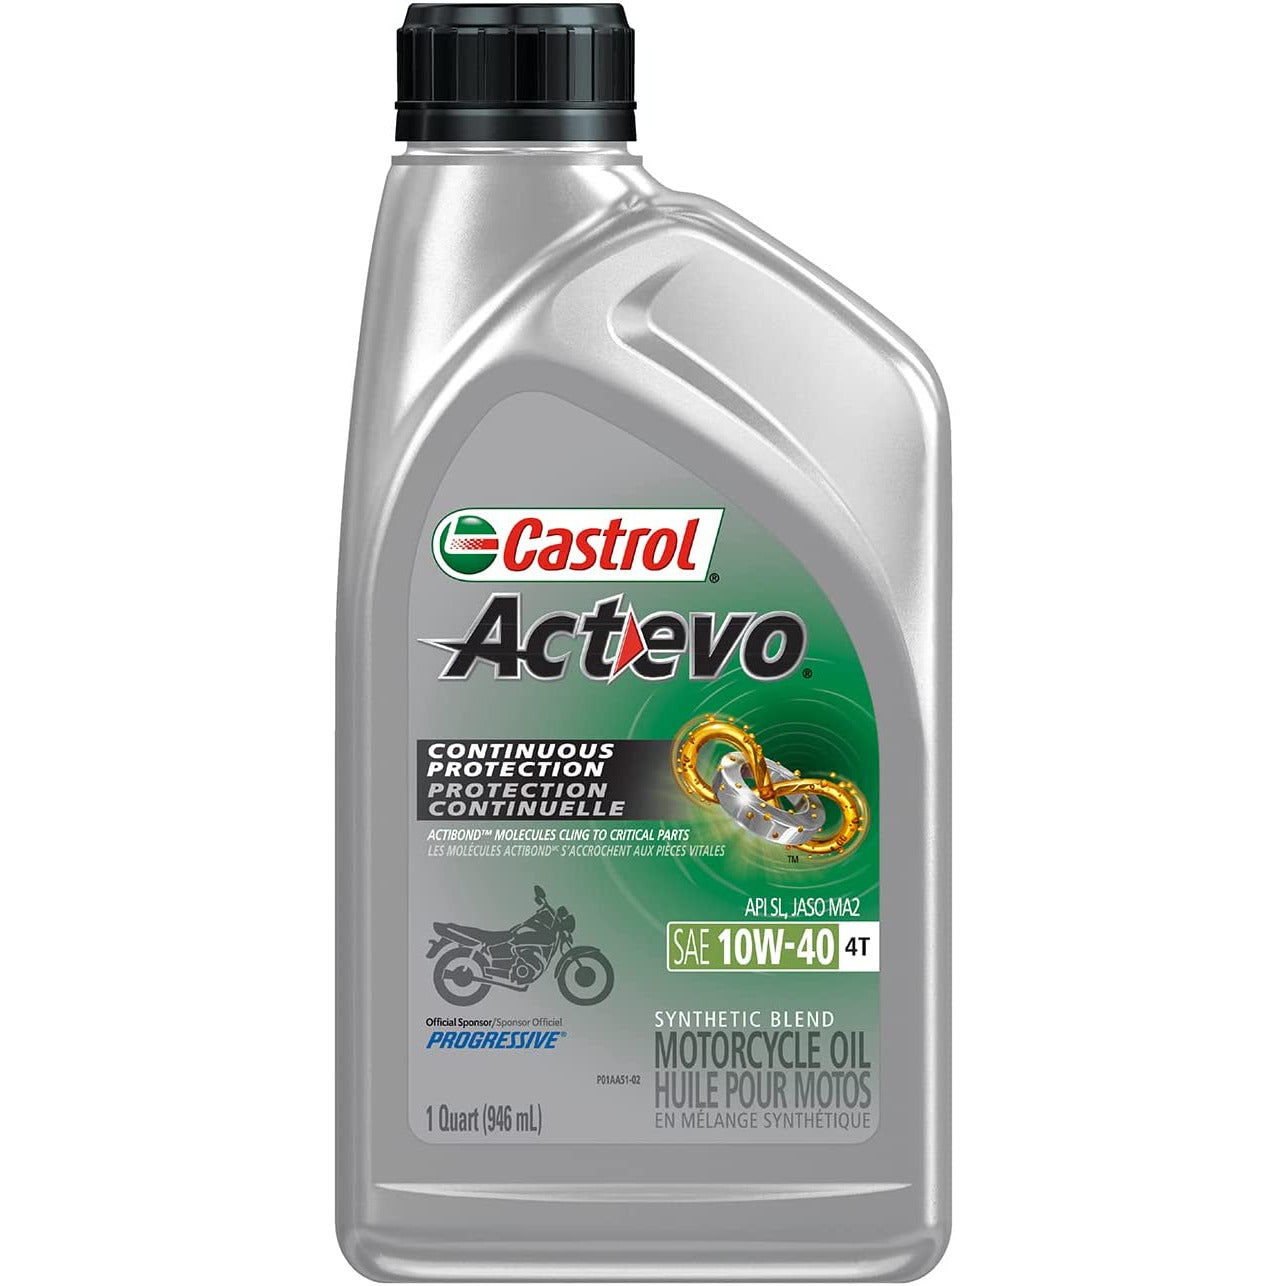 CTL 15D7D2 | ACTEVO 4T SYNTHETIC BLEND 10W-40 MOTORCYCLE OIL : 1 QT